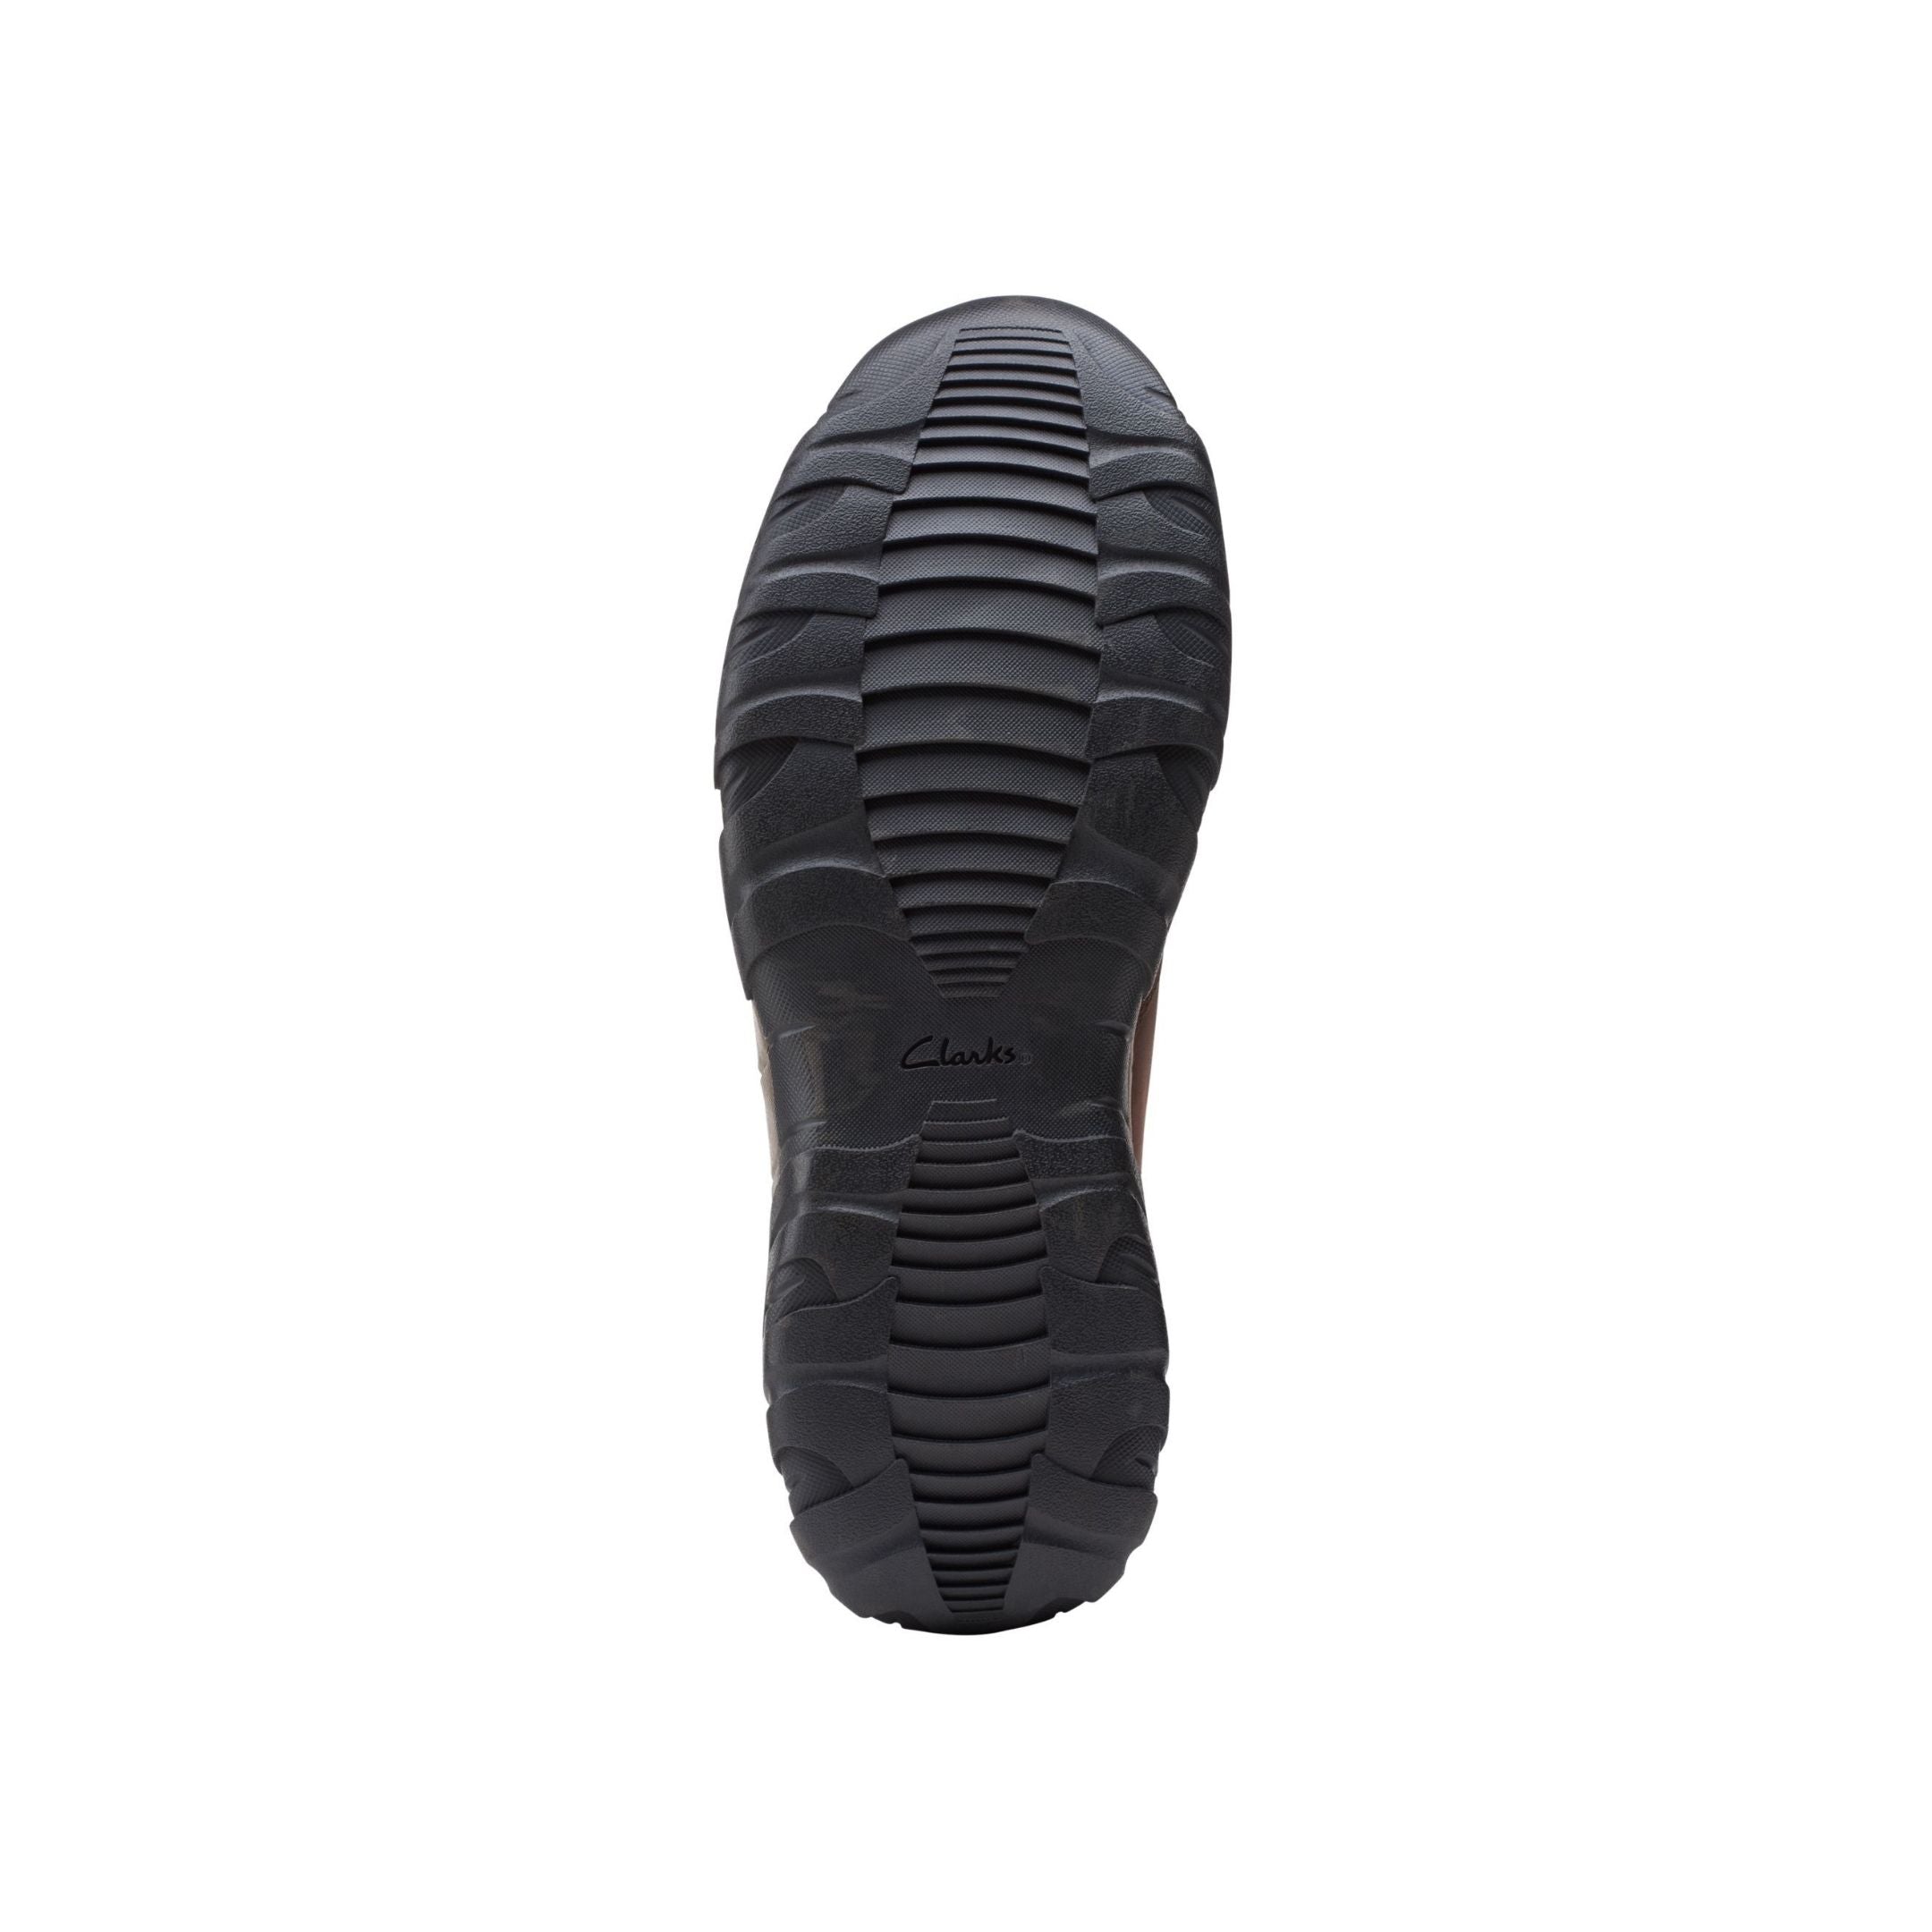 Black outsole with tread 